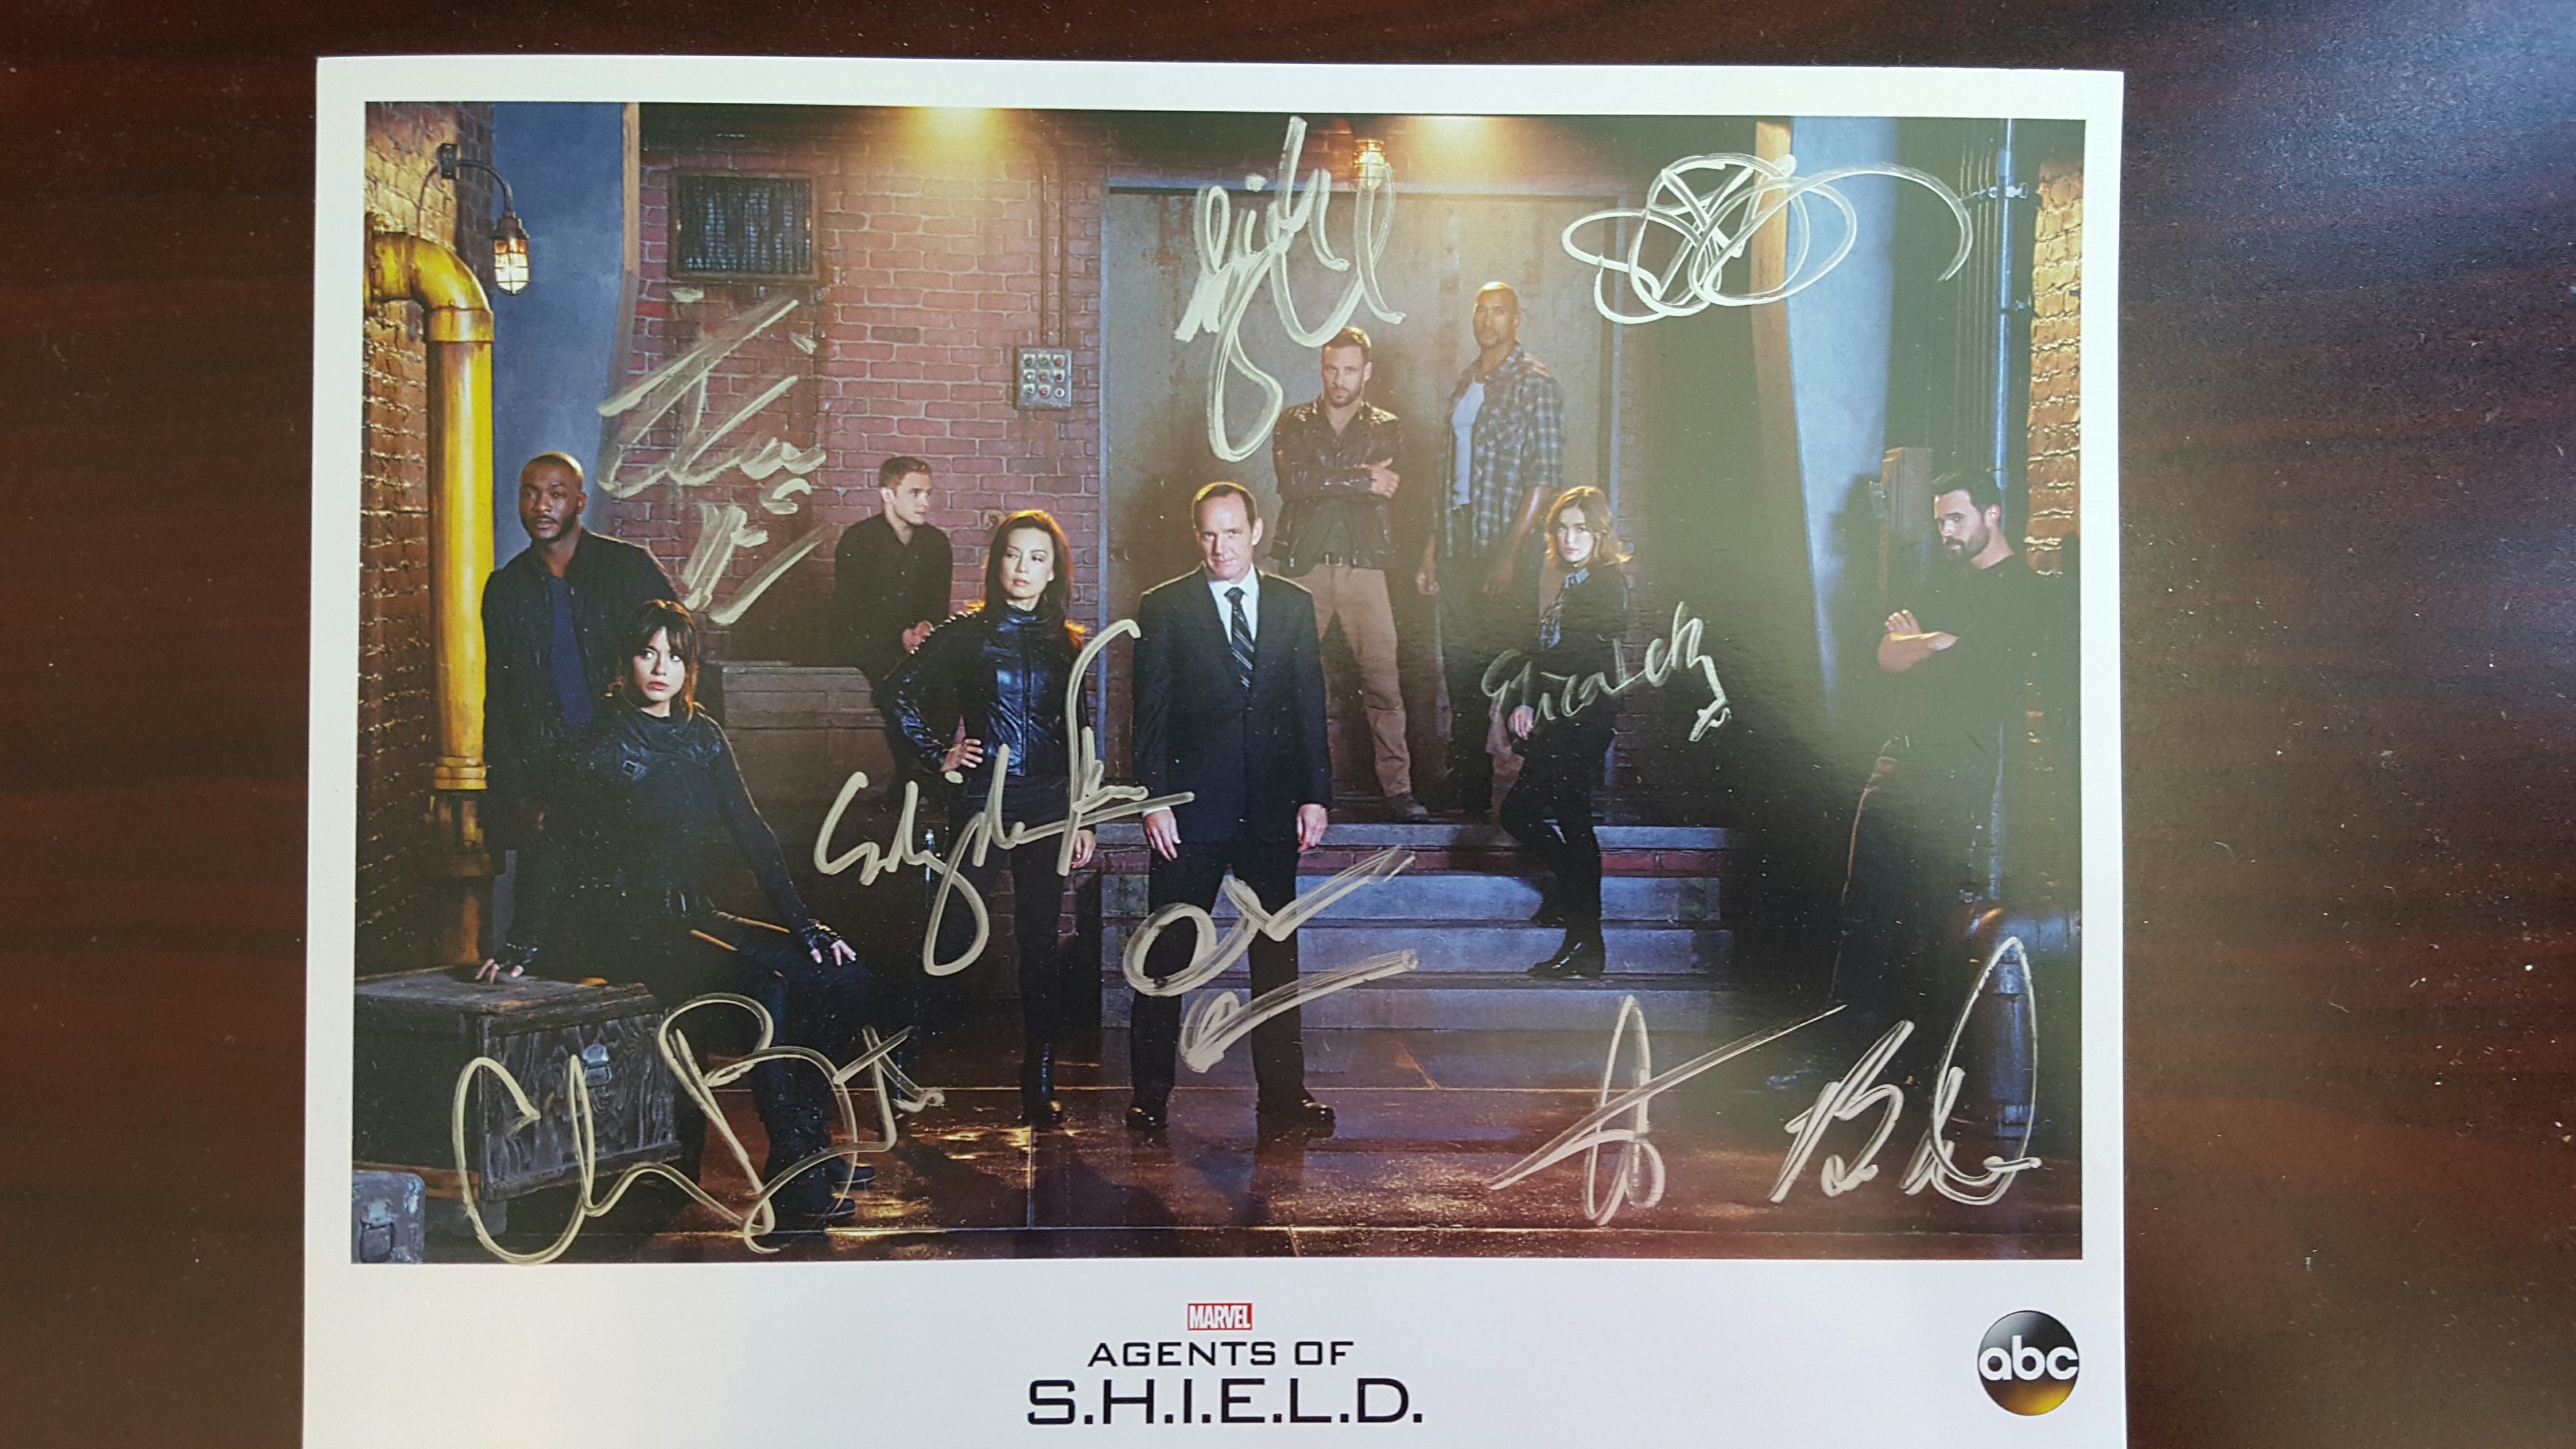 Agents of SHIELD Signed Collectibles on eBay for Charity!